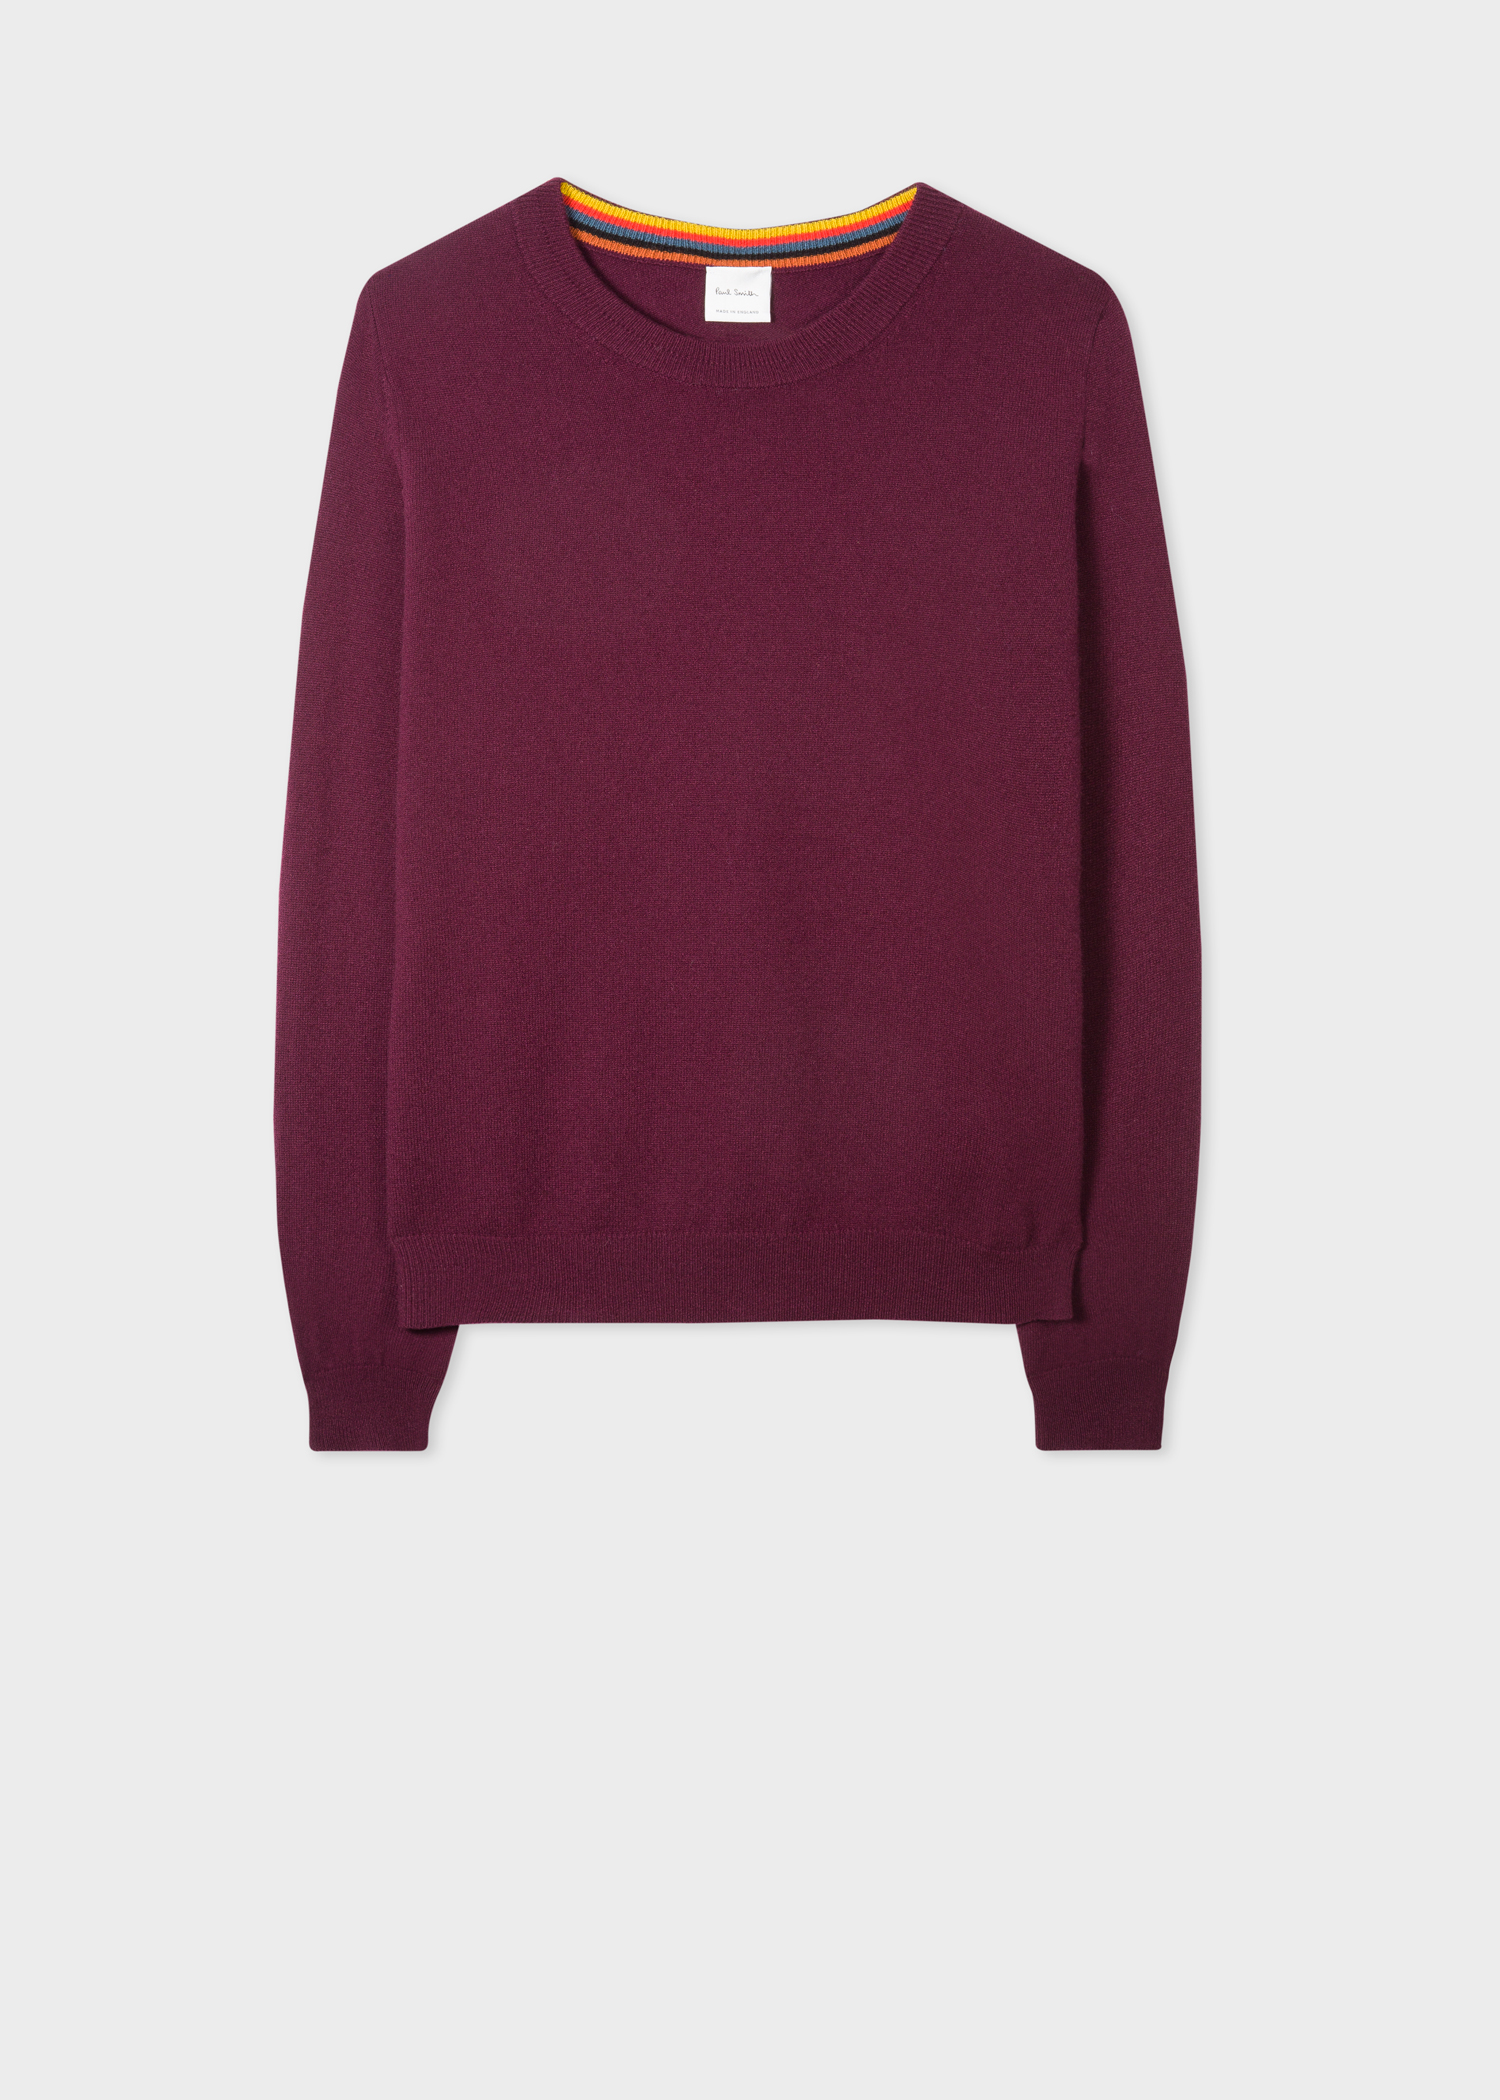 Front view - Women's Damson Cashmere Sweater With 'Artist Stripe' Trims Paul Smith